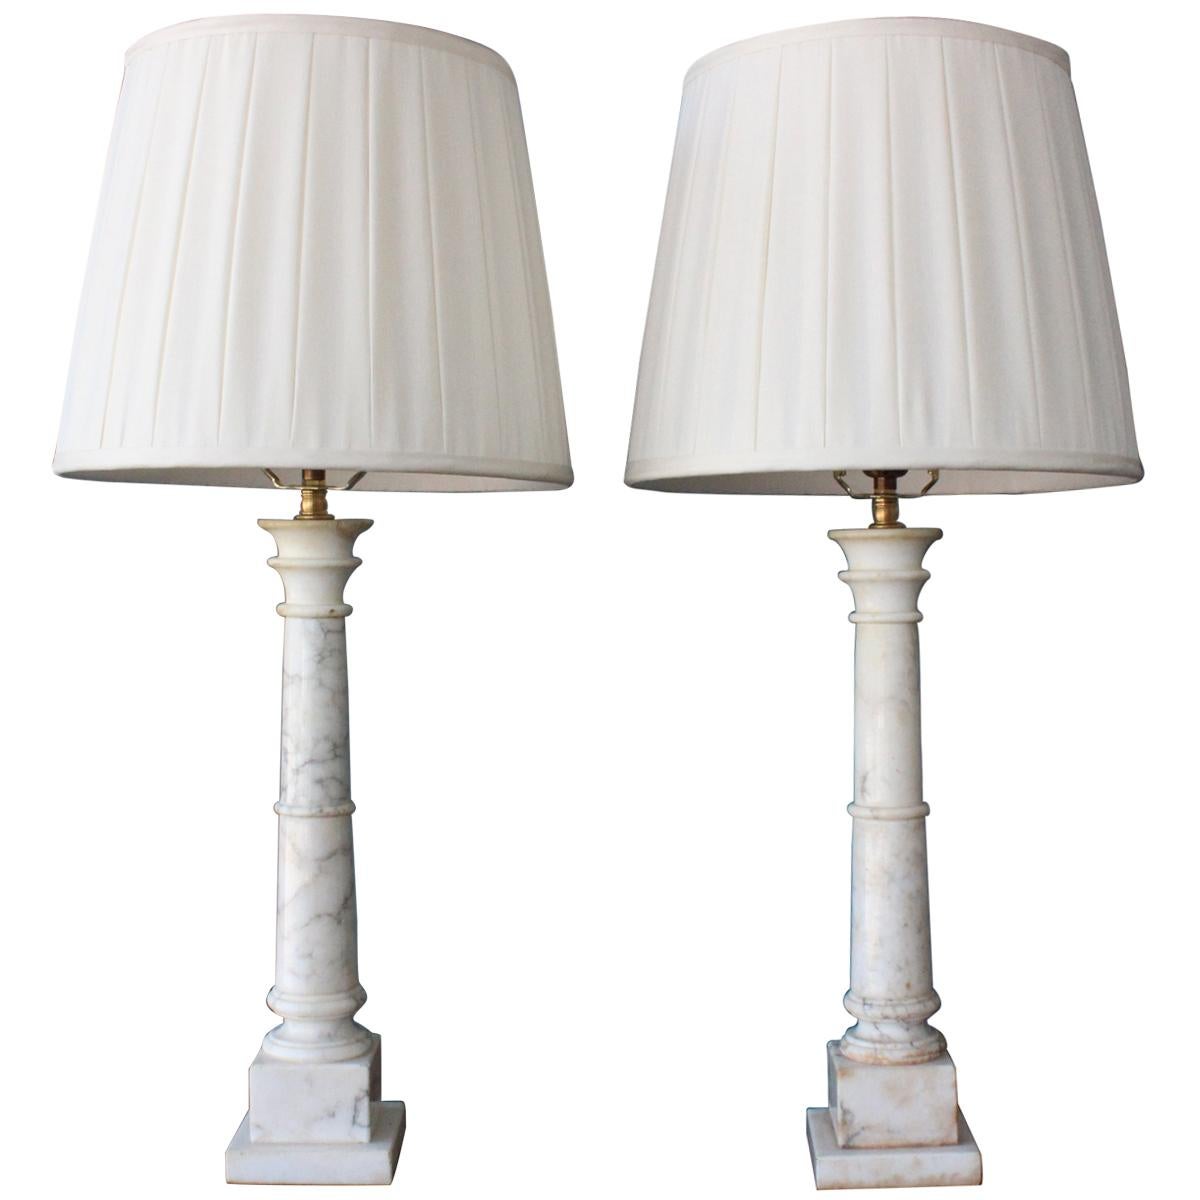 Pair of Marble Column Lamps with Silk Shades, USA, 1940s